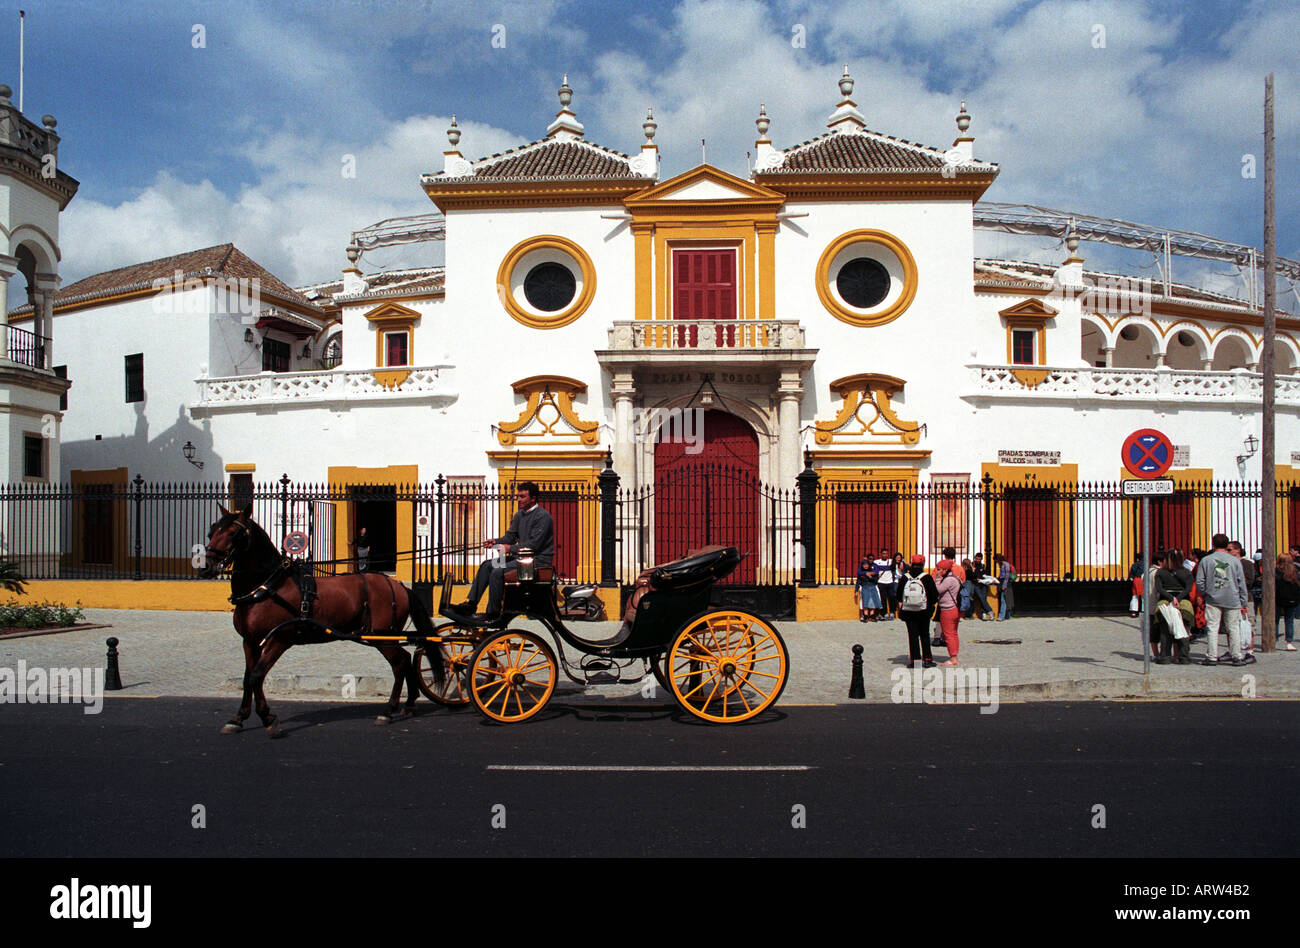 Maestranza Bull ring Seville Puerta del Principe through which only the  most successfull toreros are allowed to leave the arena Stock Photo - Alamy